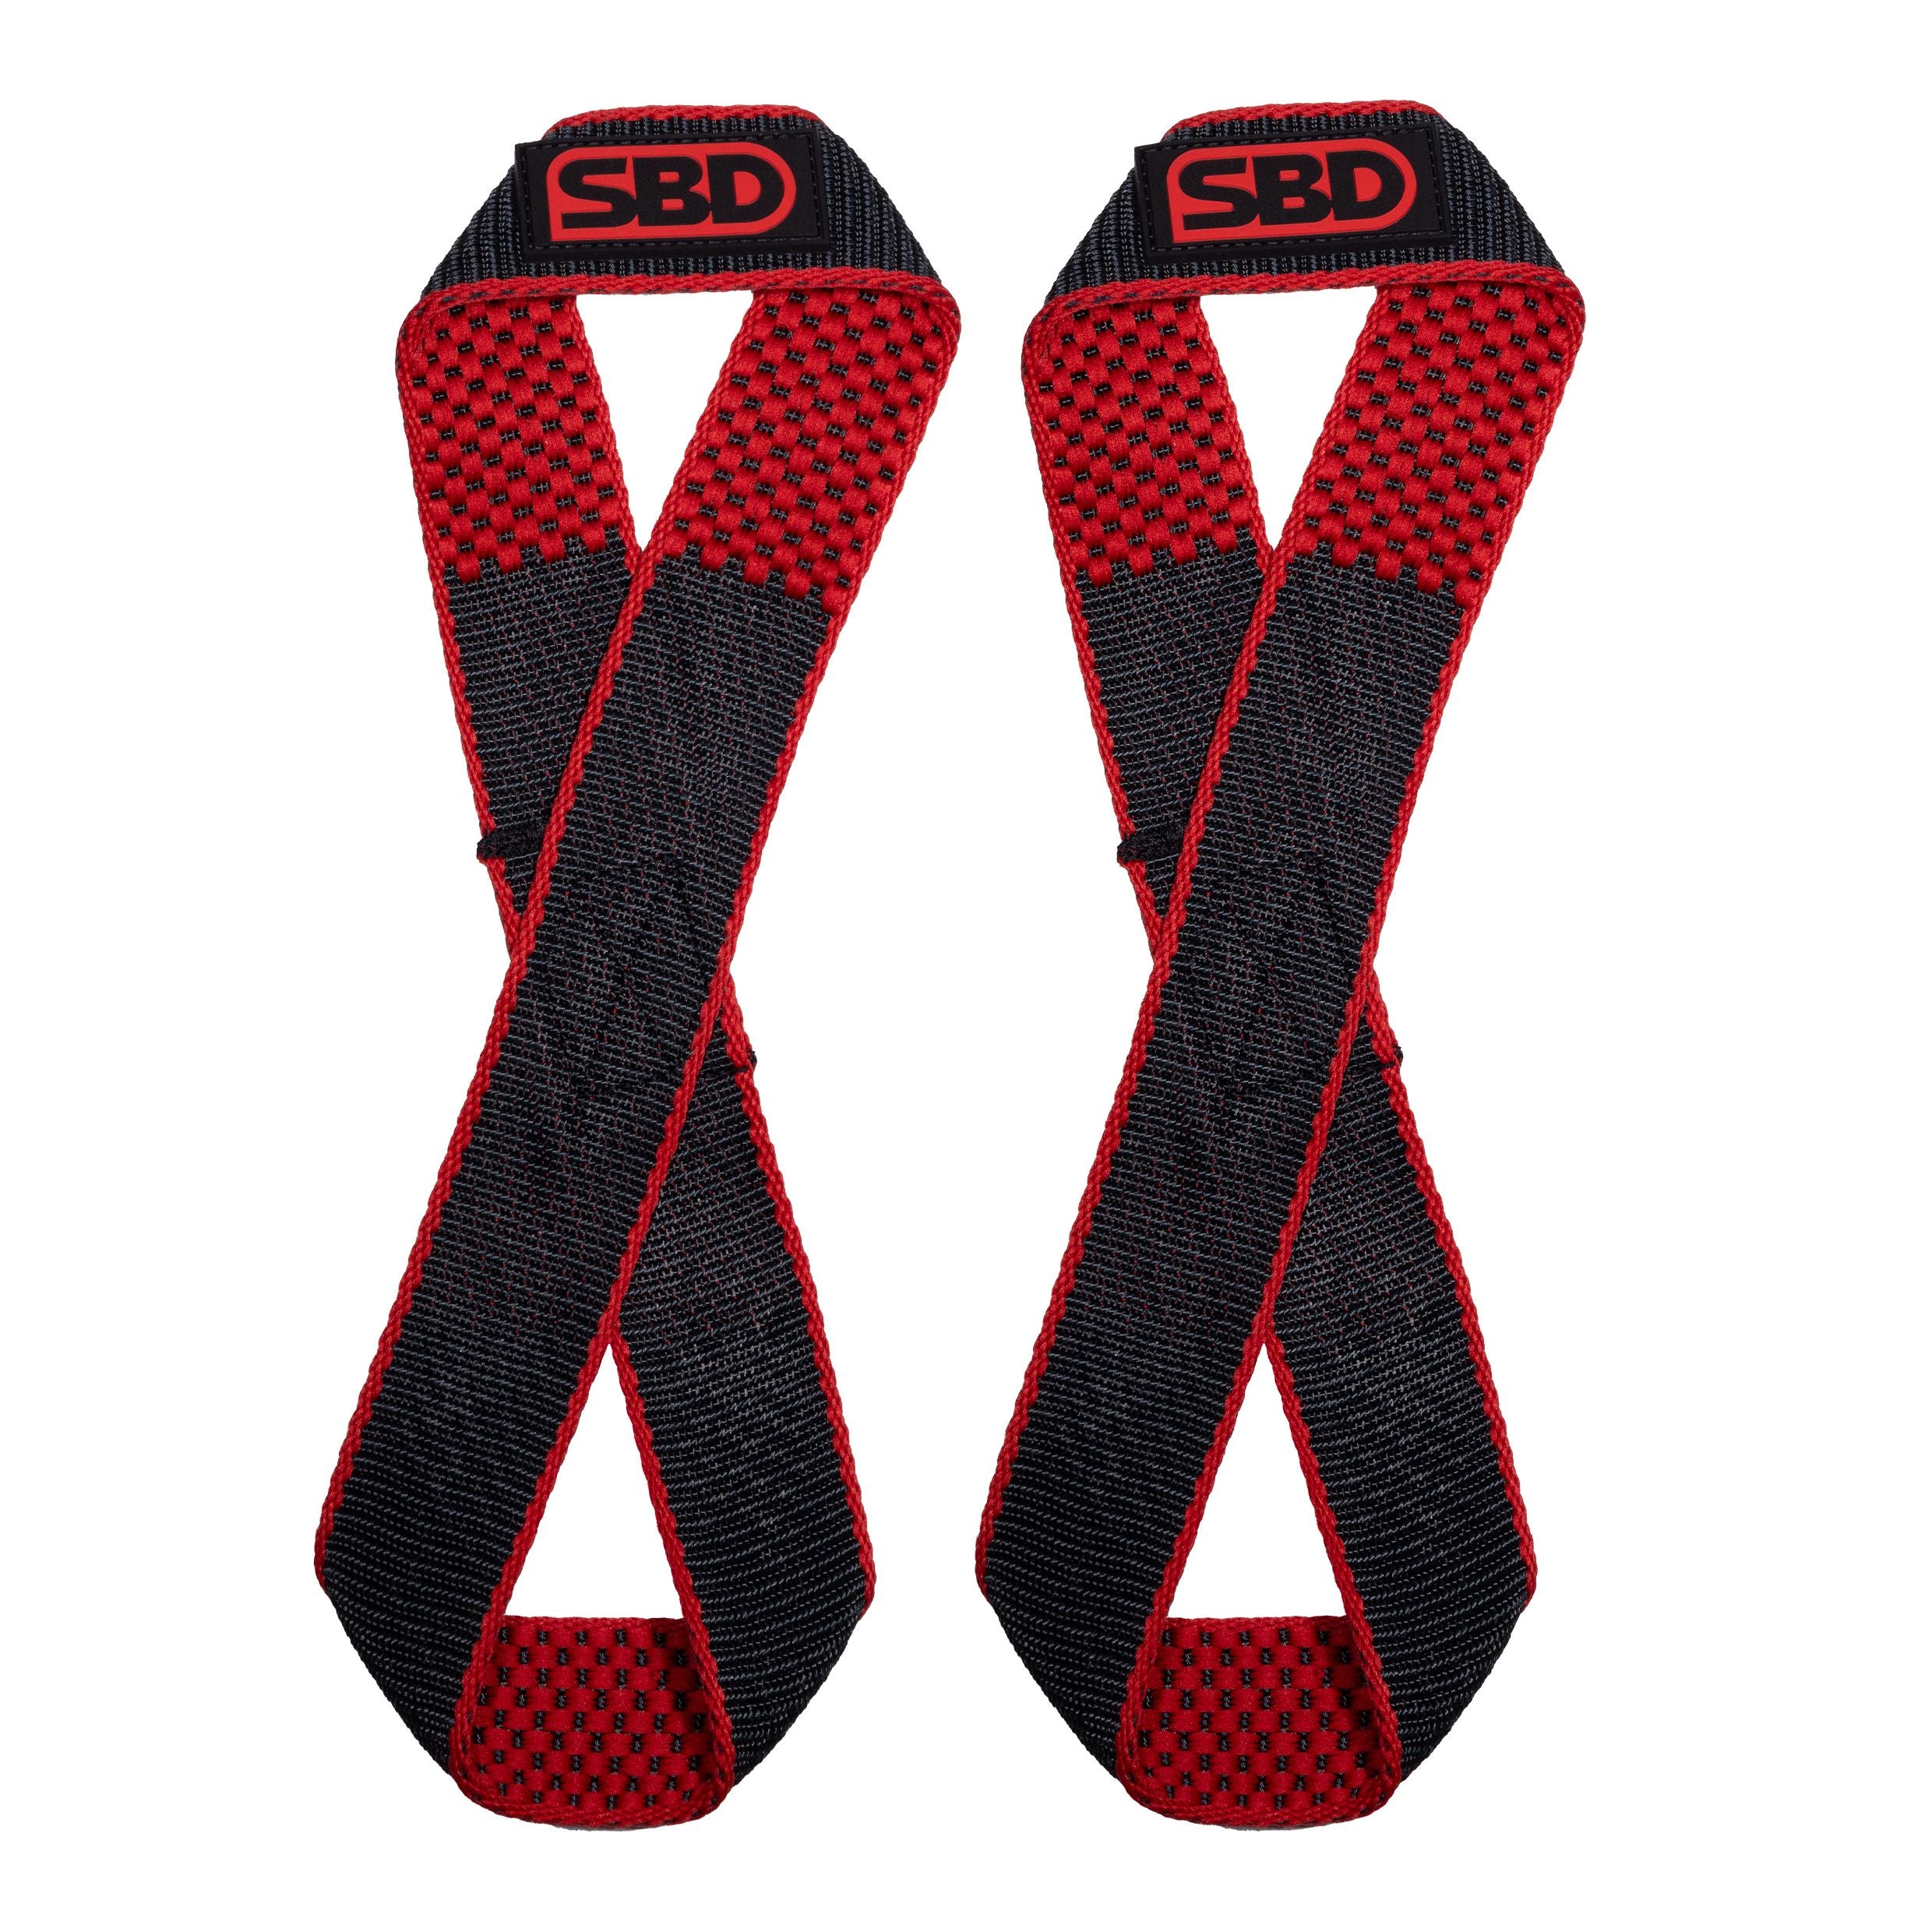 SBD Figure 8 Lifting Straps, Weight Lifting Straps